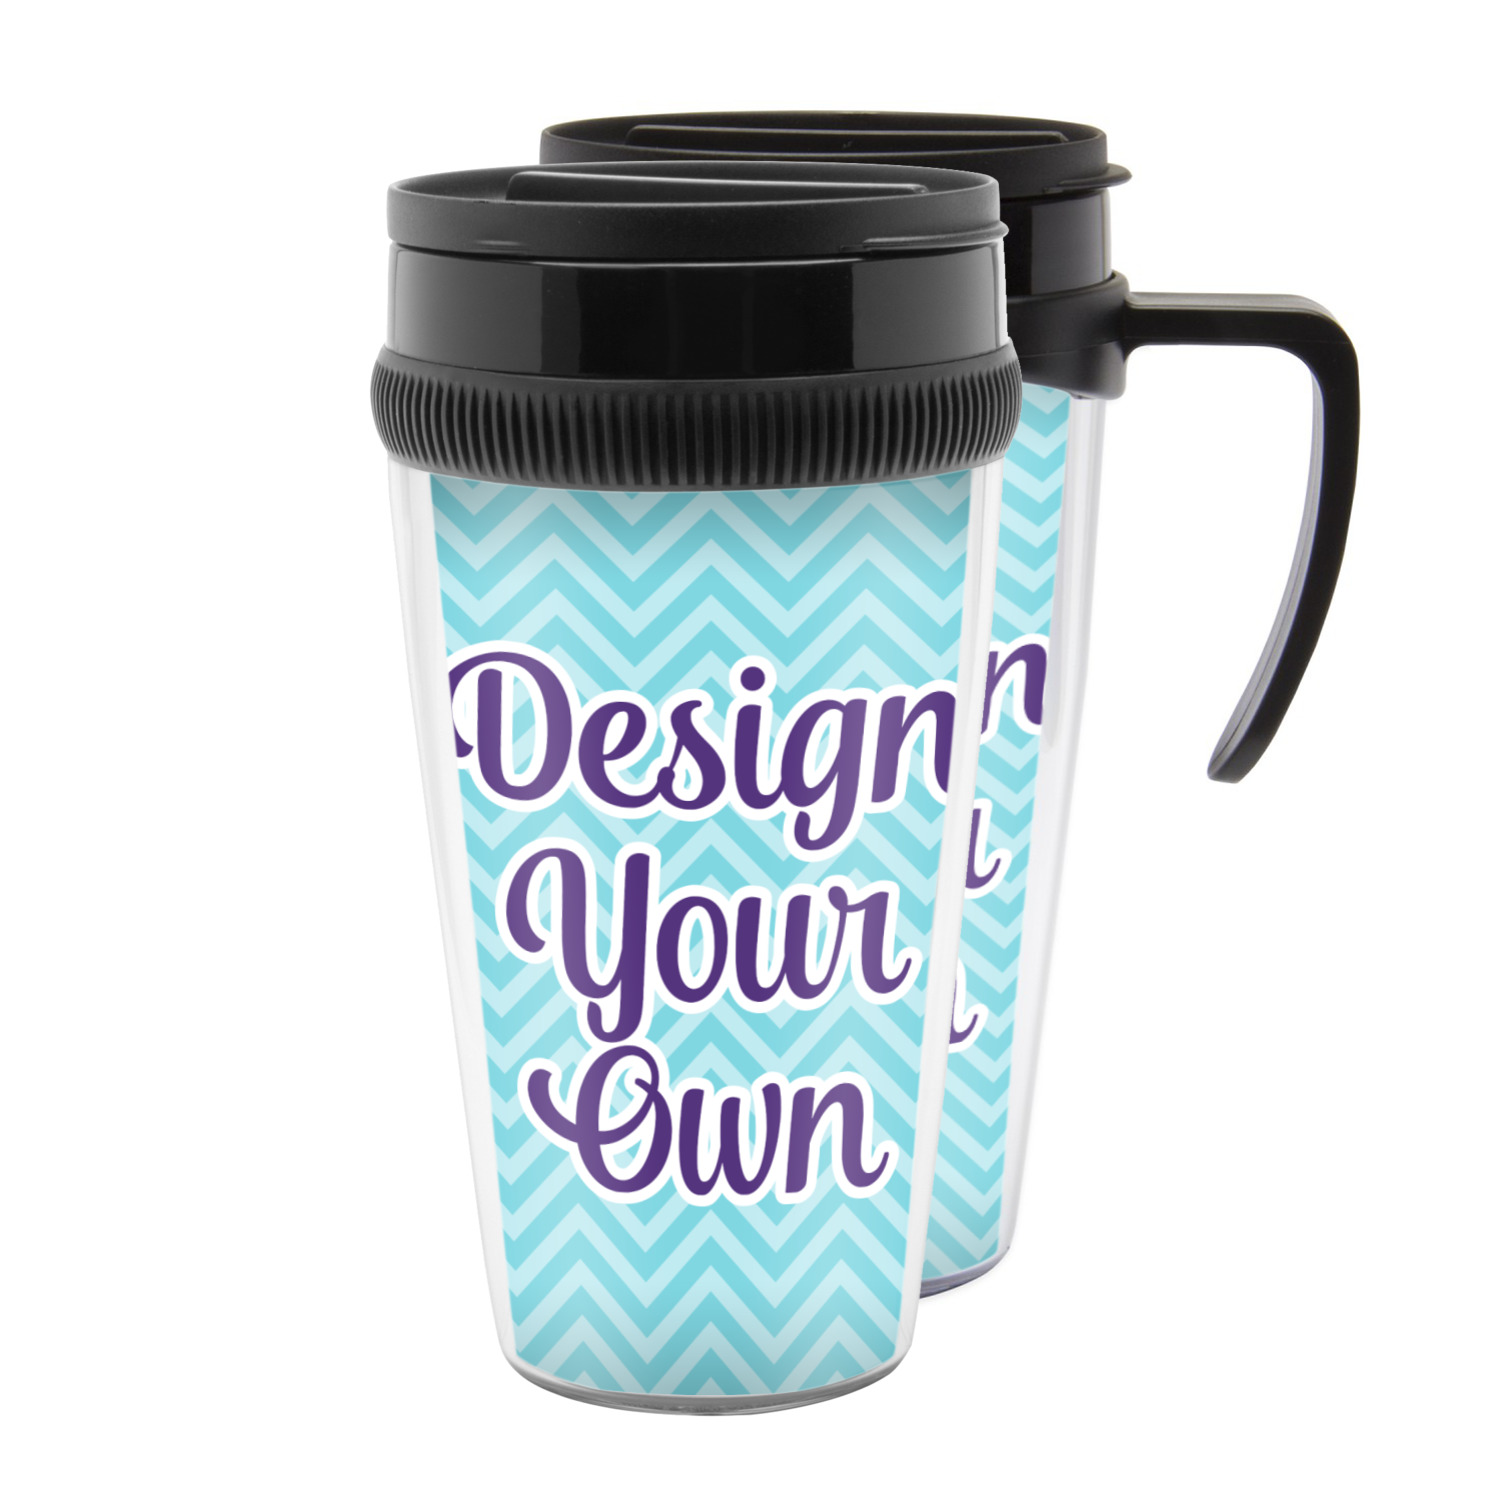 https://www.youcustomizeit.com/common/MAKE/965833/Design-Your-Own-Acrylic-Travel-Mugs.jpg?lm=1595602665